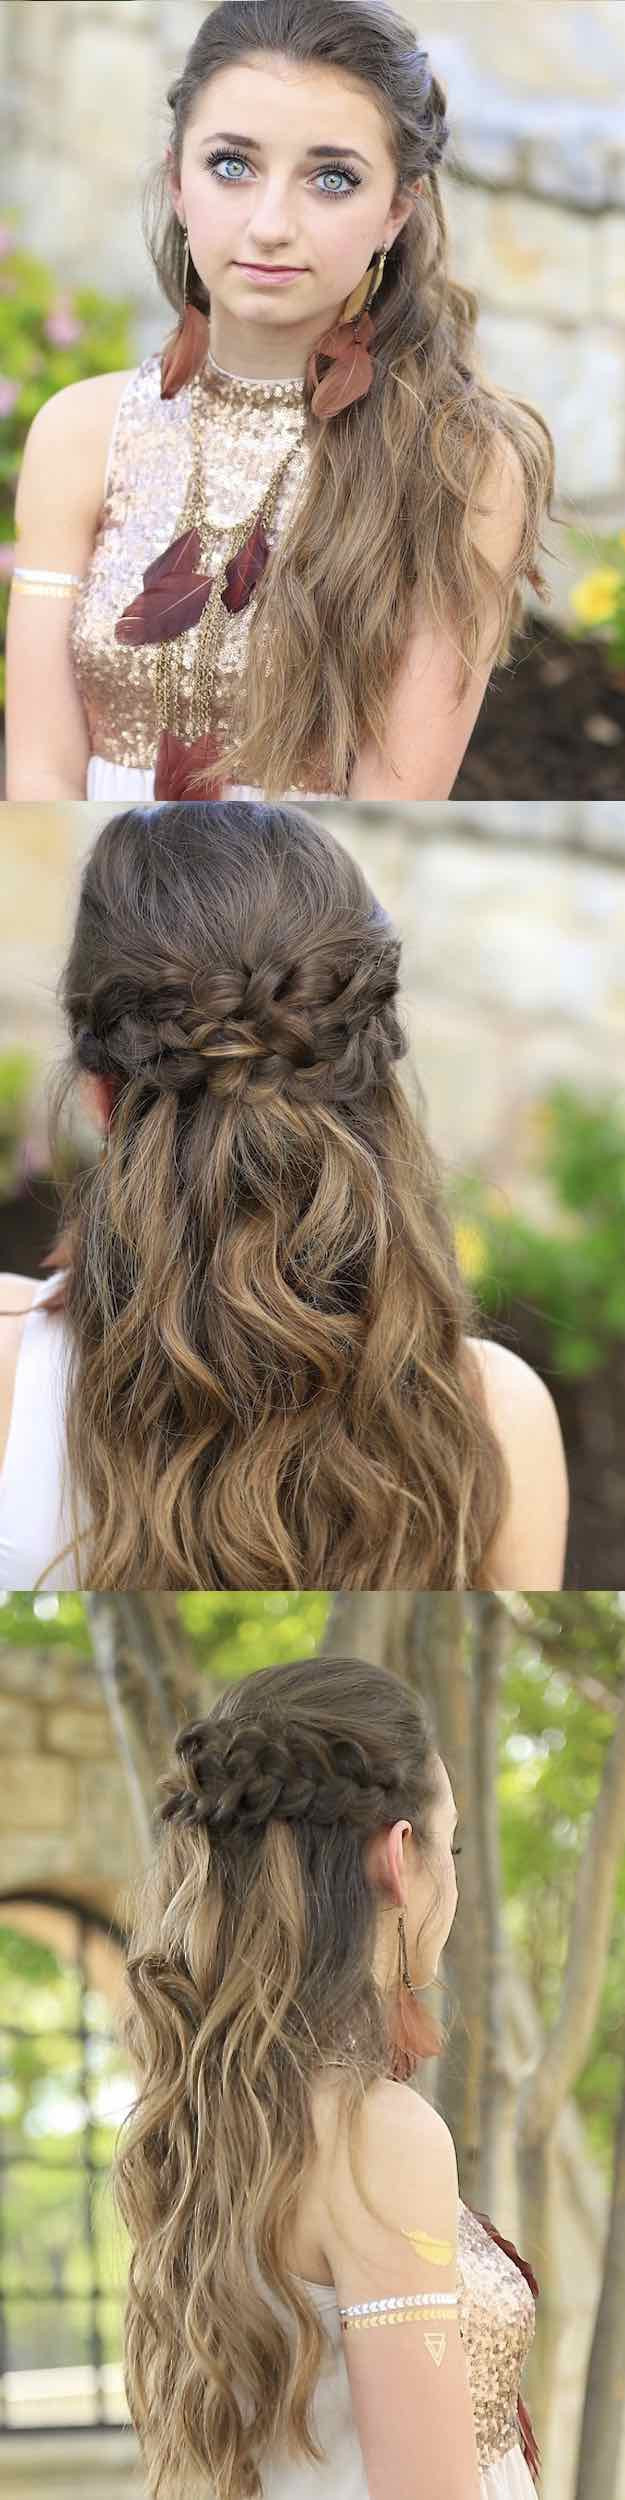 Cute Half Up Hairstyles
 25 Easy Half Up Half Down Hairstyle Tutorials For Prom